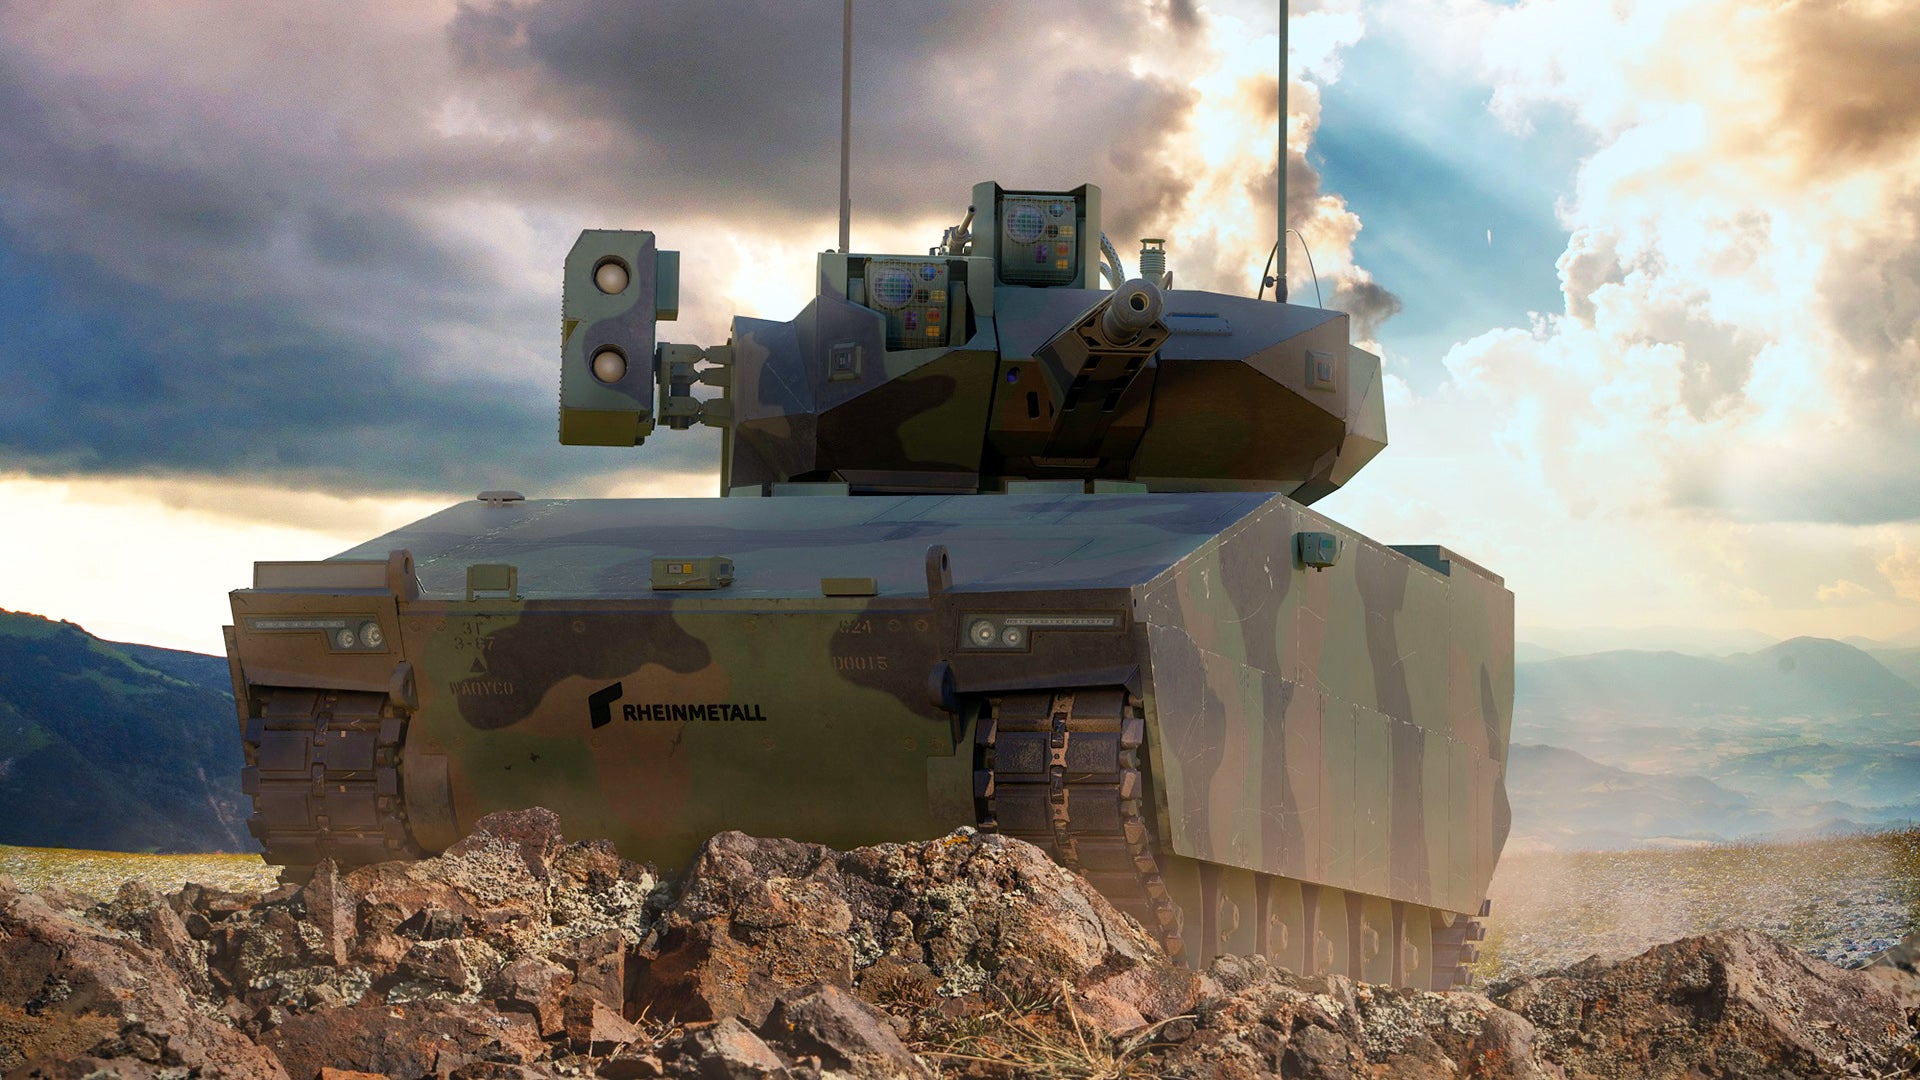 This optionally manned Lynx could replace the Army’s Bradley fighting vehicles